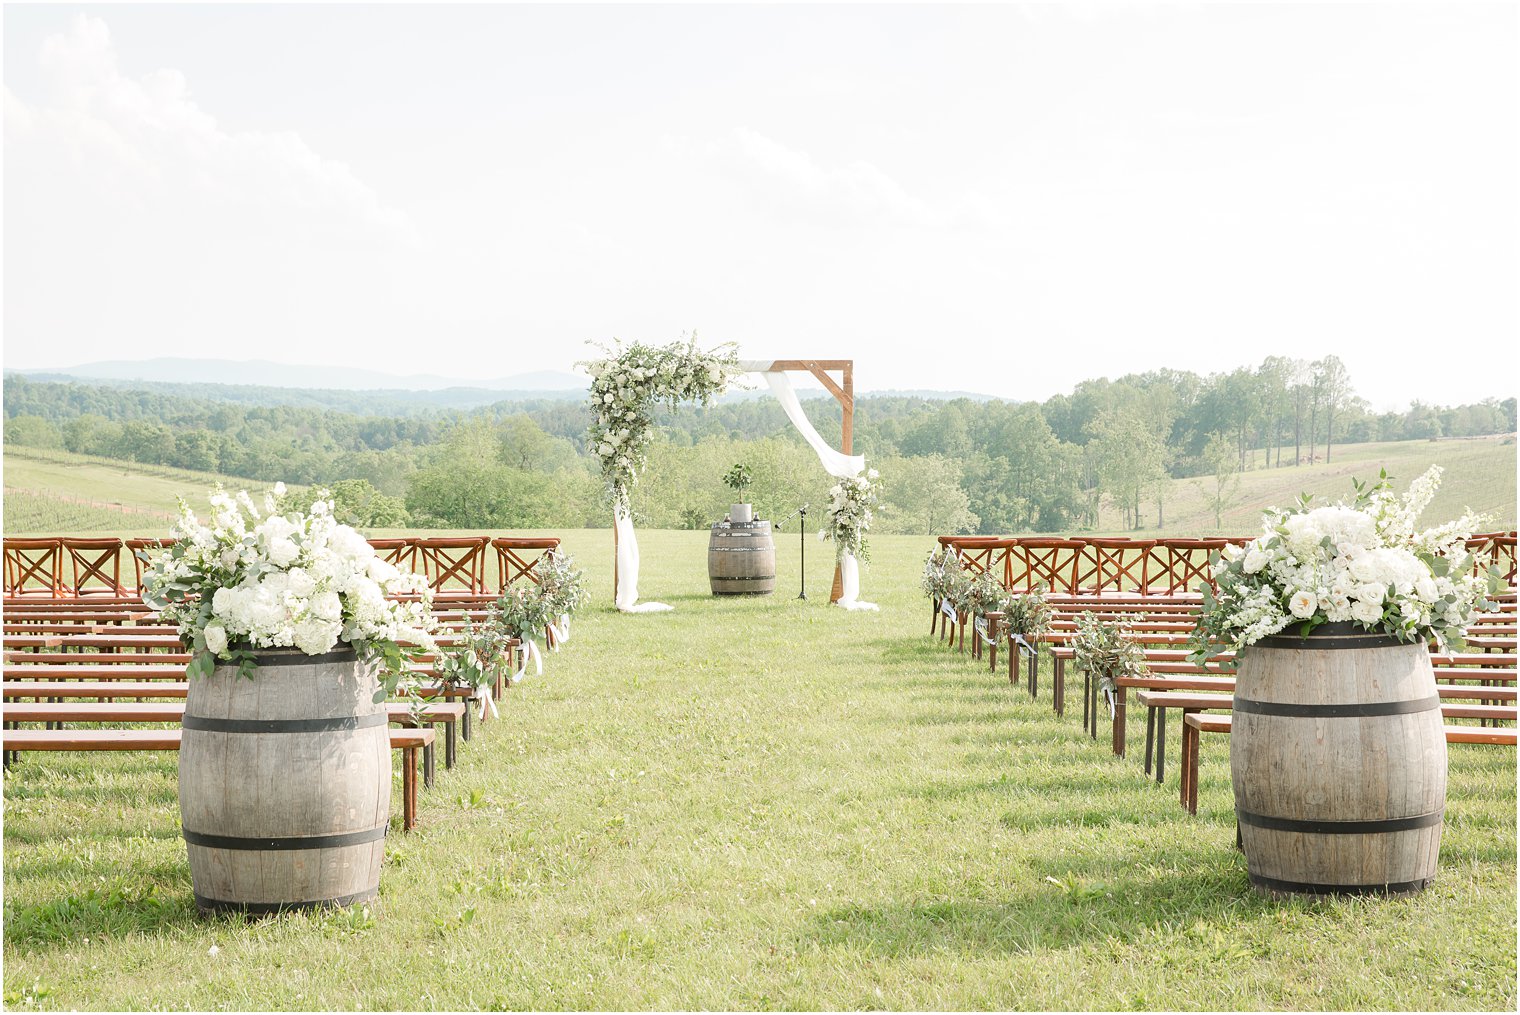 Wedding ceremony at Stone Tower Winery | Florals by Holly Chapple